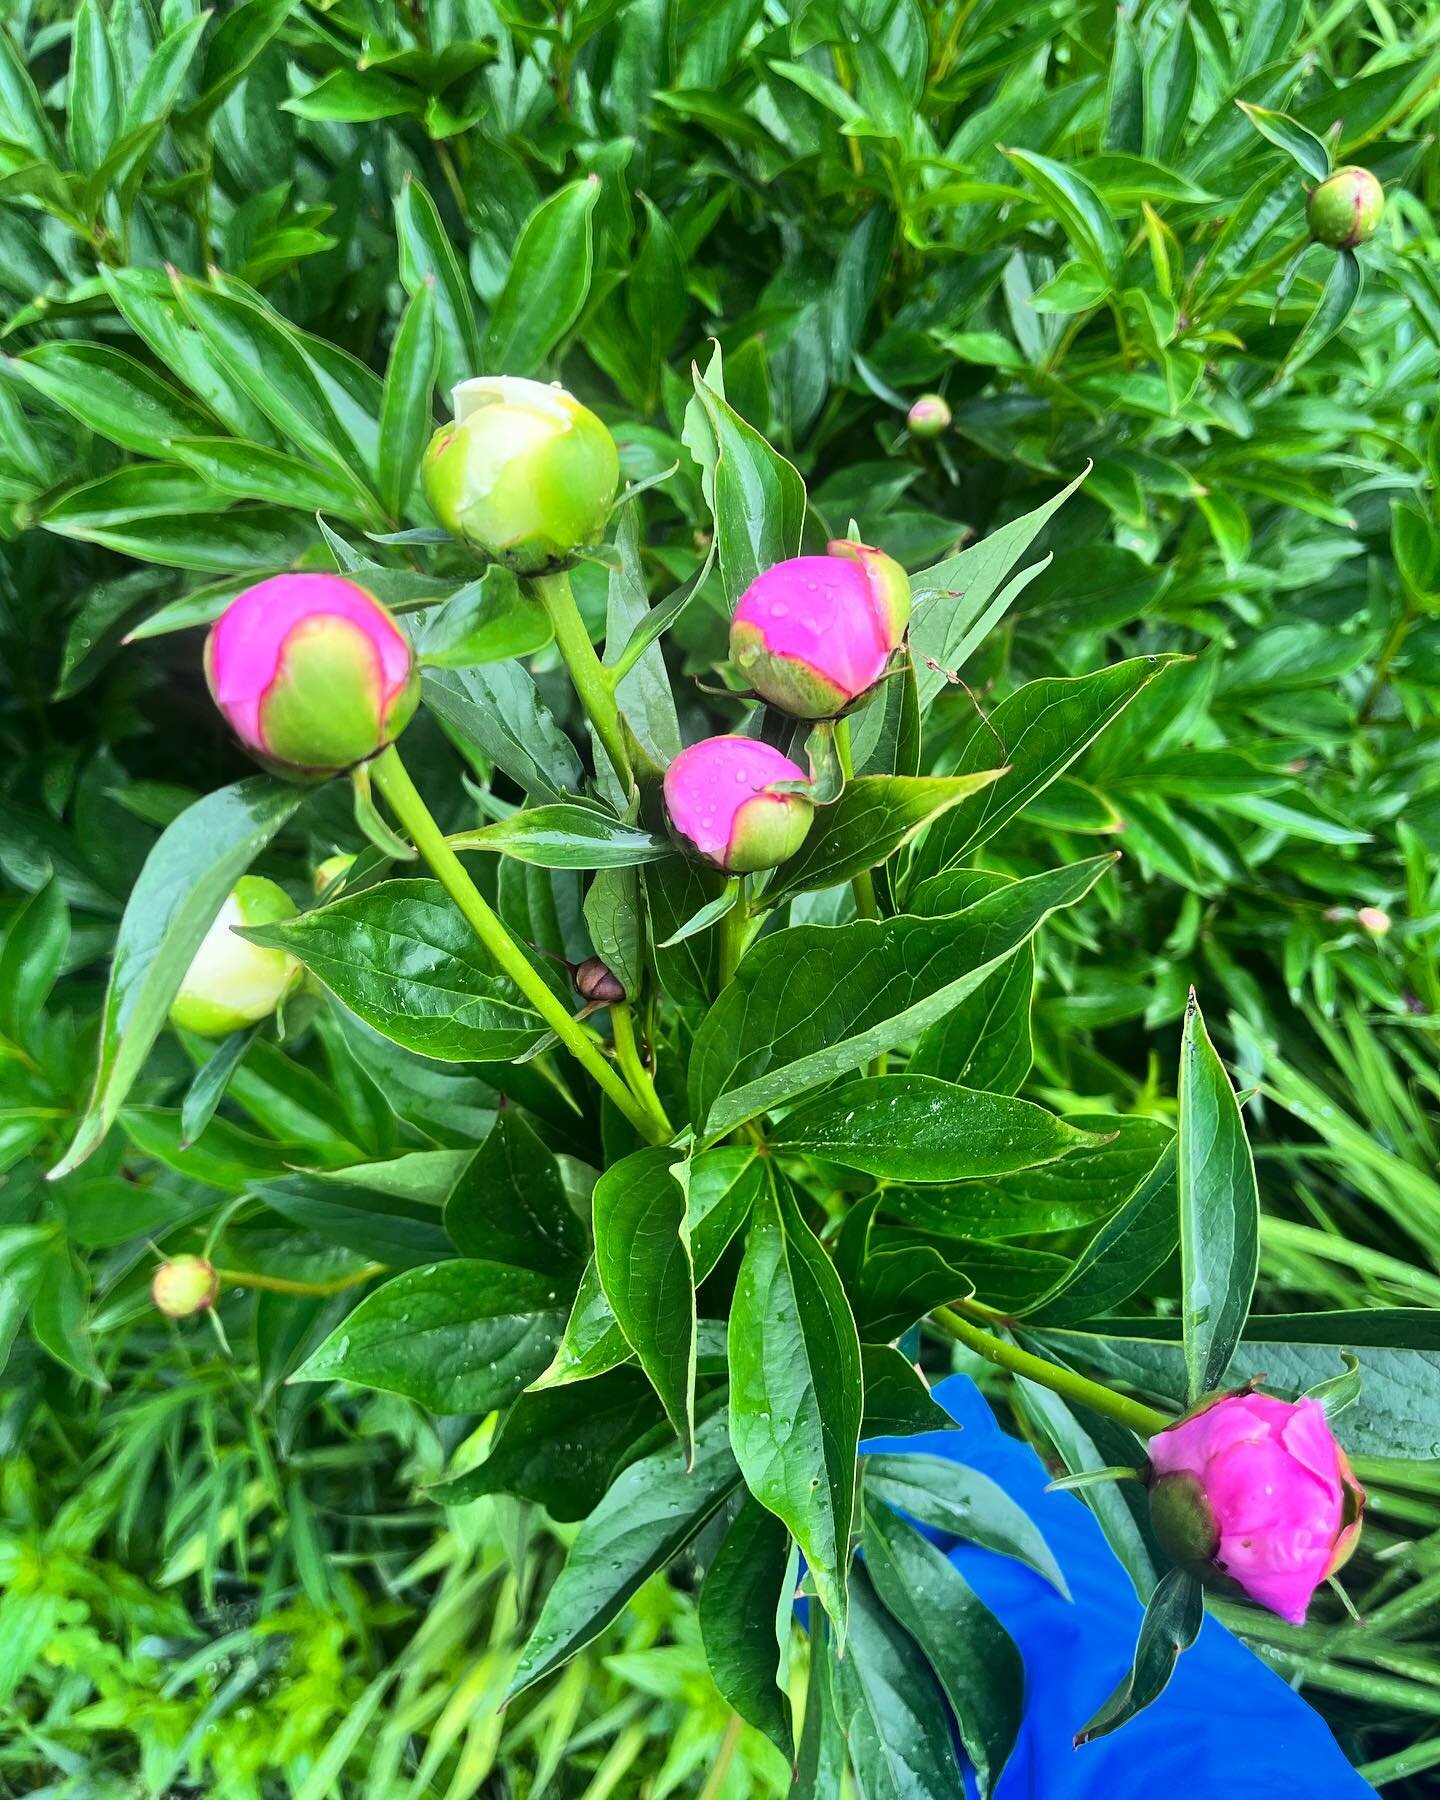 Peony season! The point in the year where our hearts leap for joy one minute, as we harvest these marshmallow-like buds (and then sprint them into the cooler). Then, seconds later, feel a sense of sadness when we pinch hundreds of buds off the younge